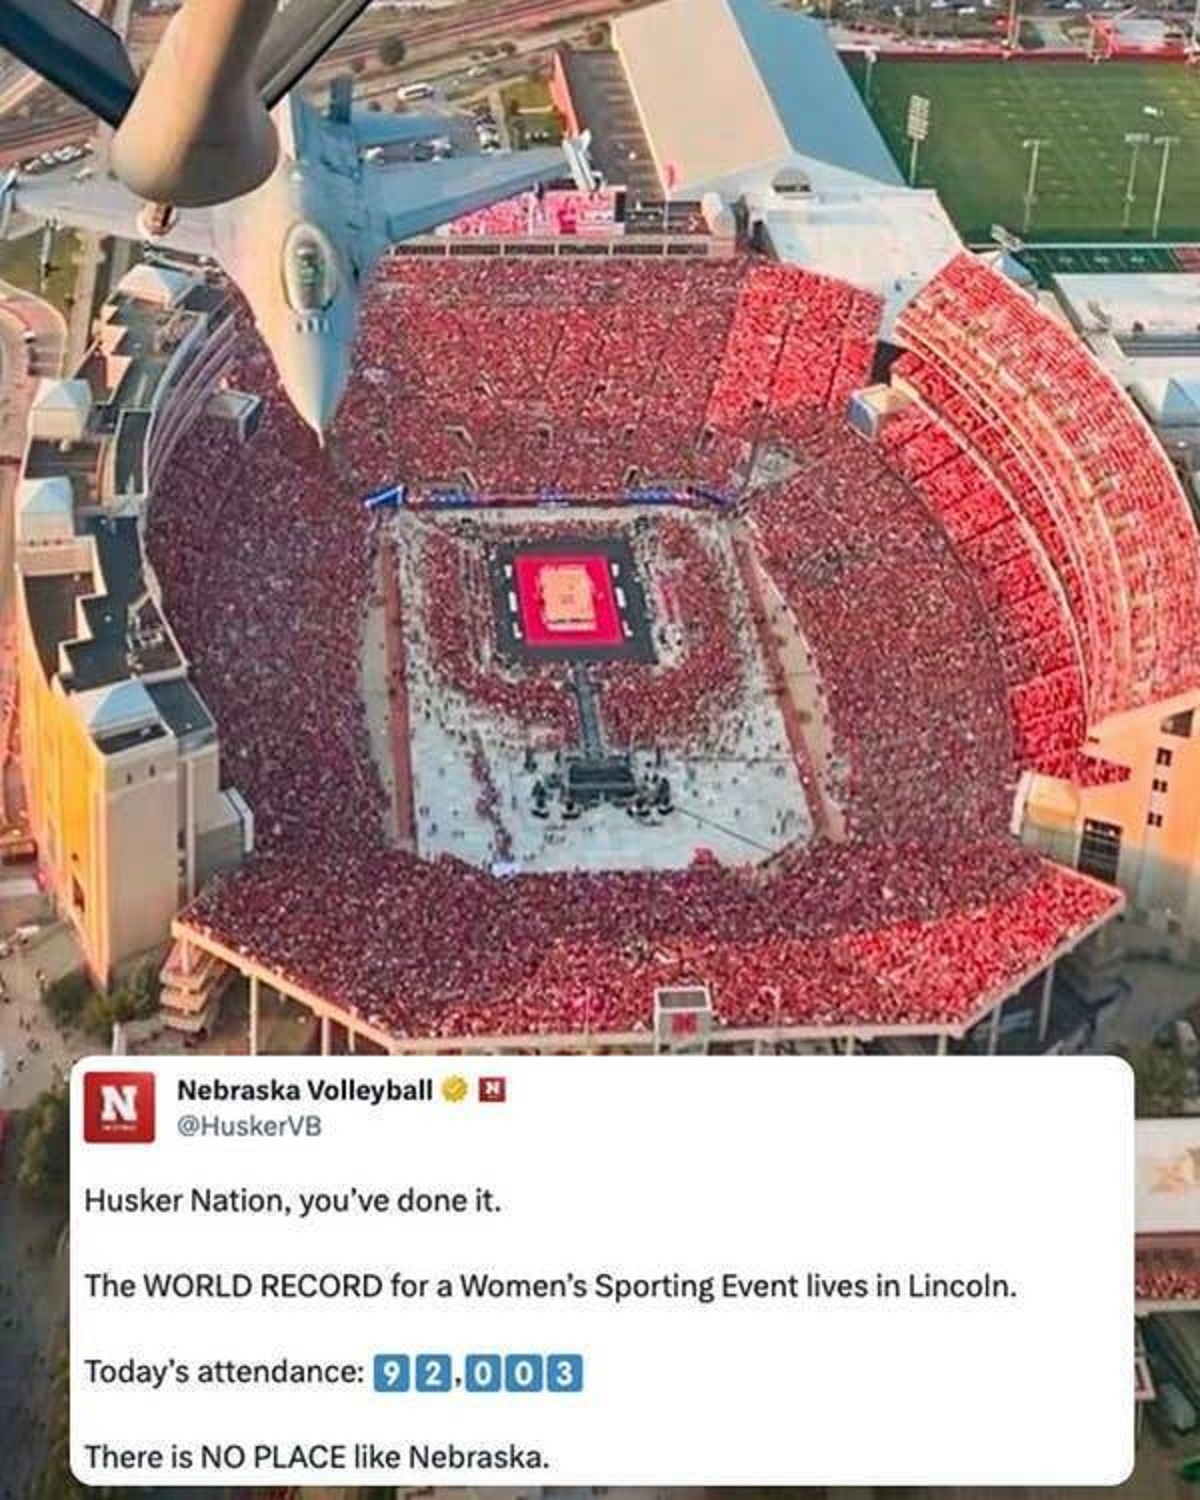 The Nebraska women's volleyball team just set a world record for the most attended women's sporting event of all time, a match against Omaha that was attended by over 92,000 people.